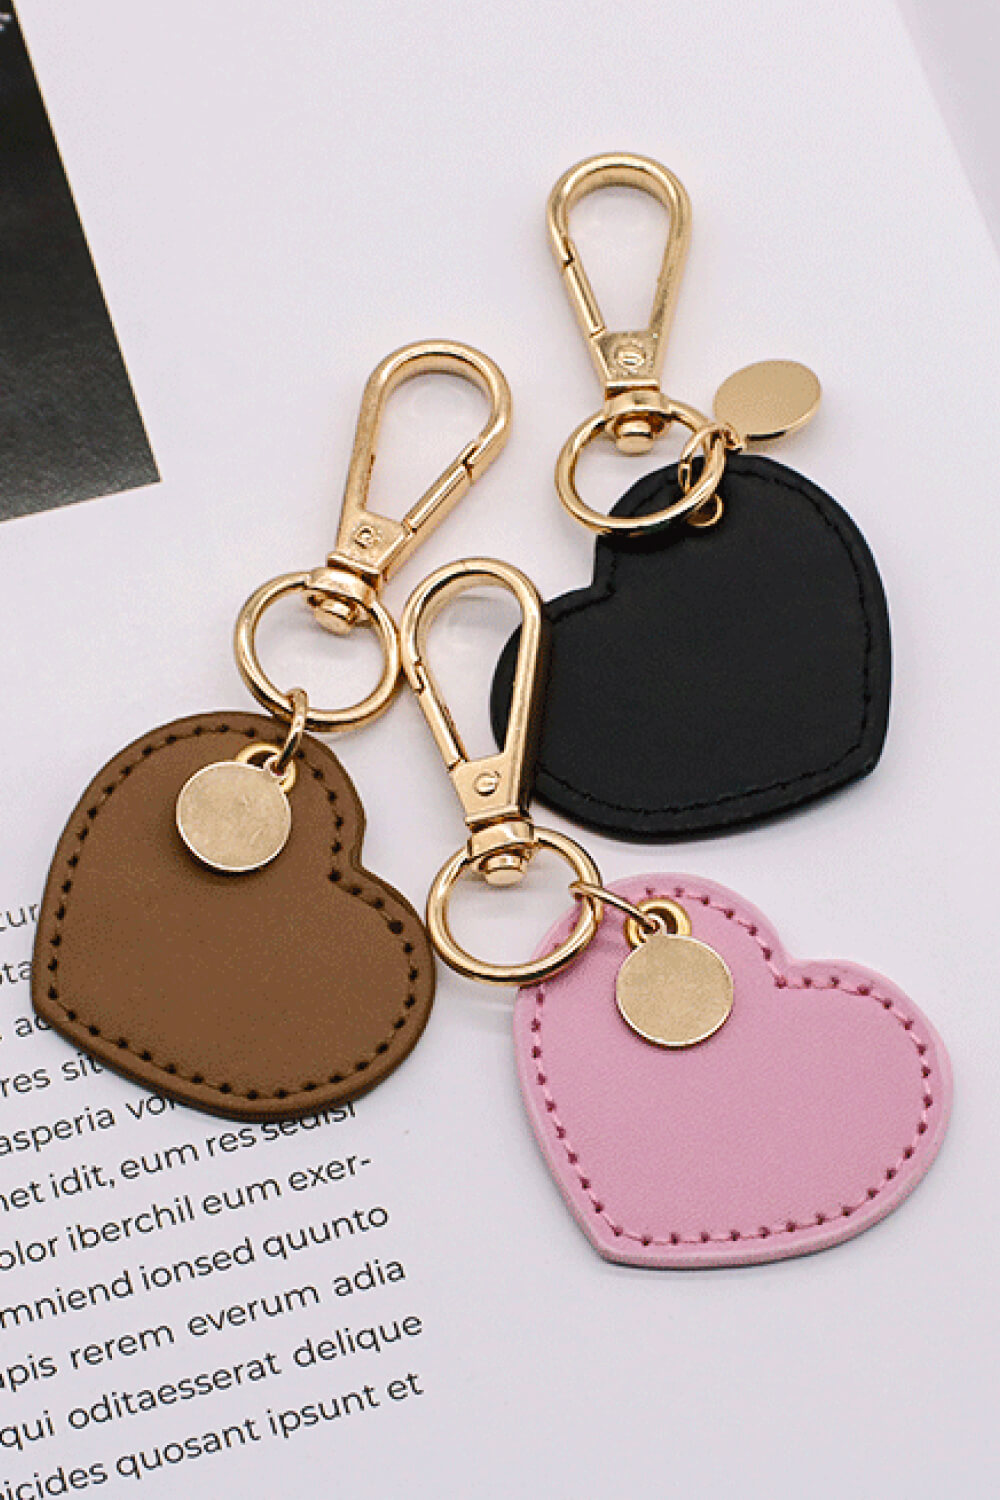 Trendsi Cupid Beauty Supplies Keychains Assorted 4-Pack Heart Shape PU Leather Keychain